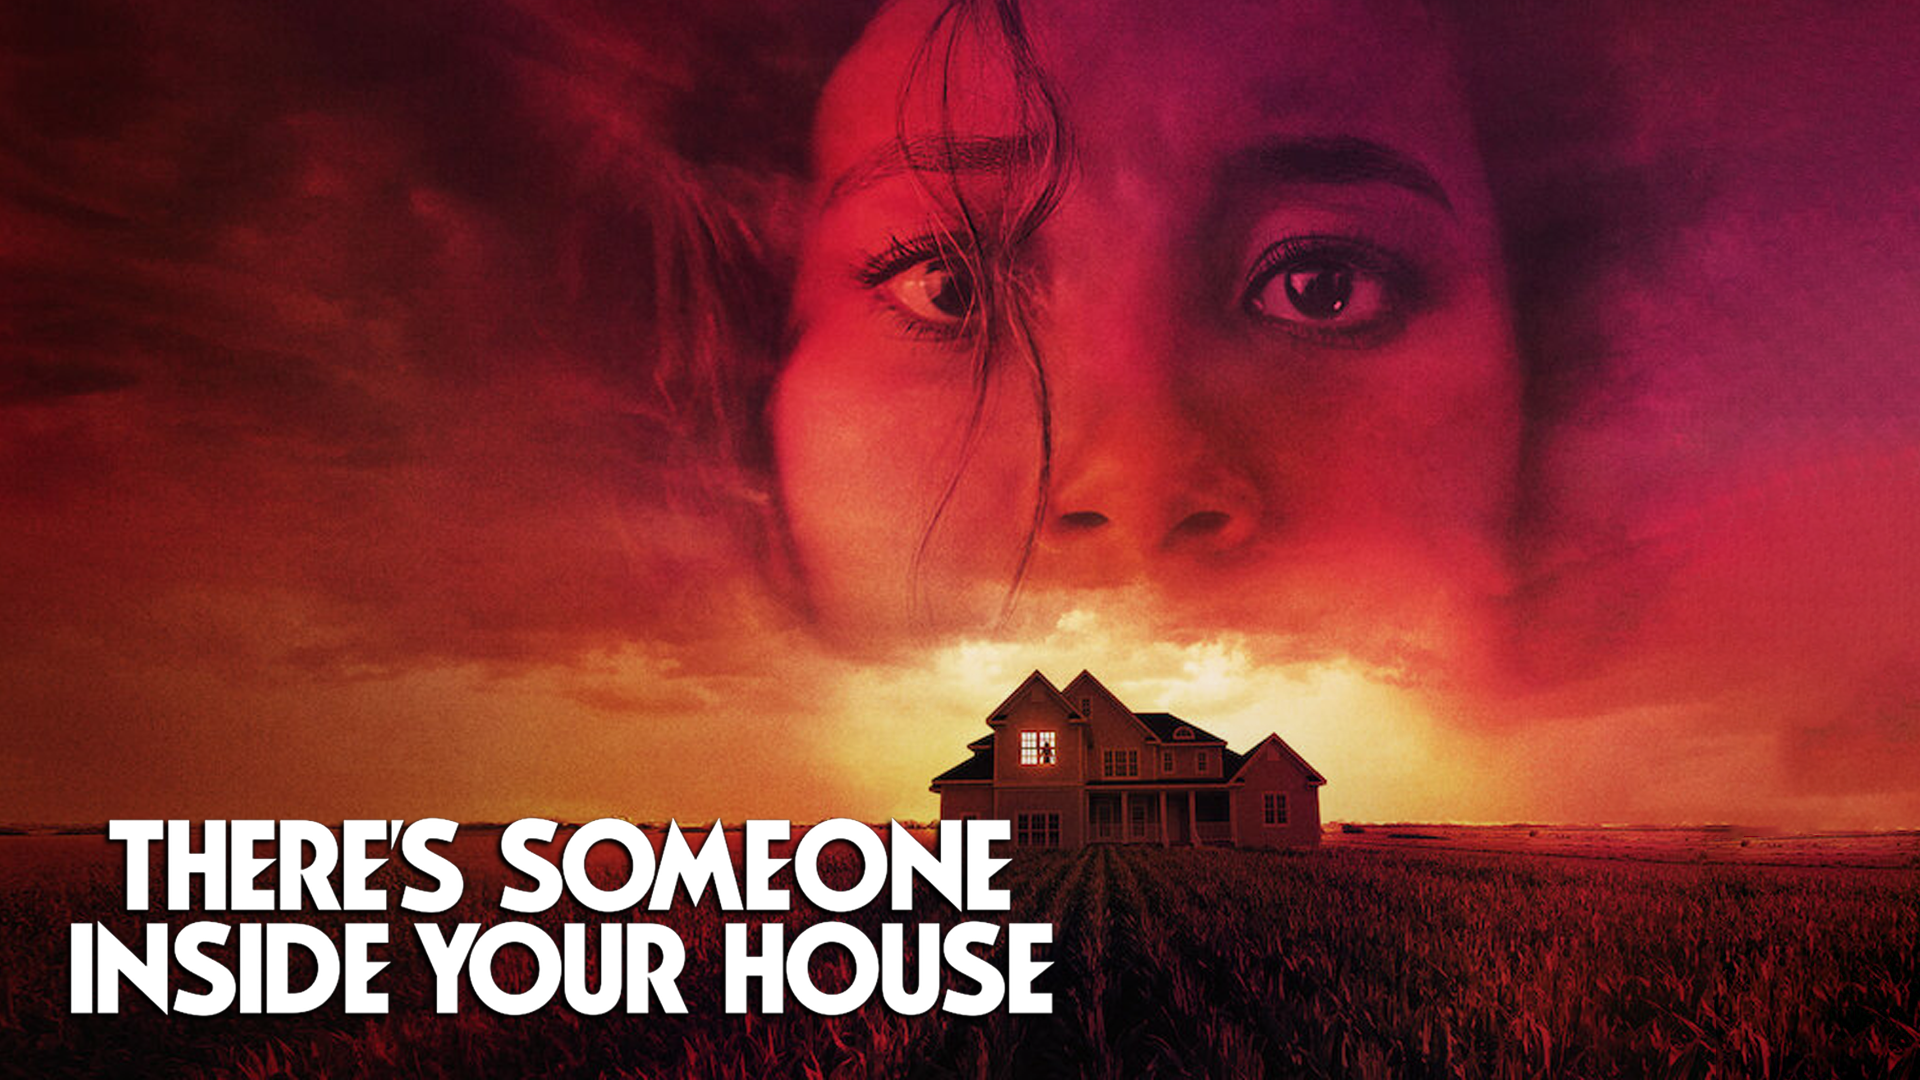 This house needs a renovation because There's Someone Inside Your House is a bad movie with cool concepts that don't add up at the end.